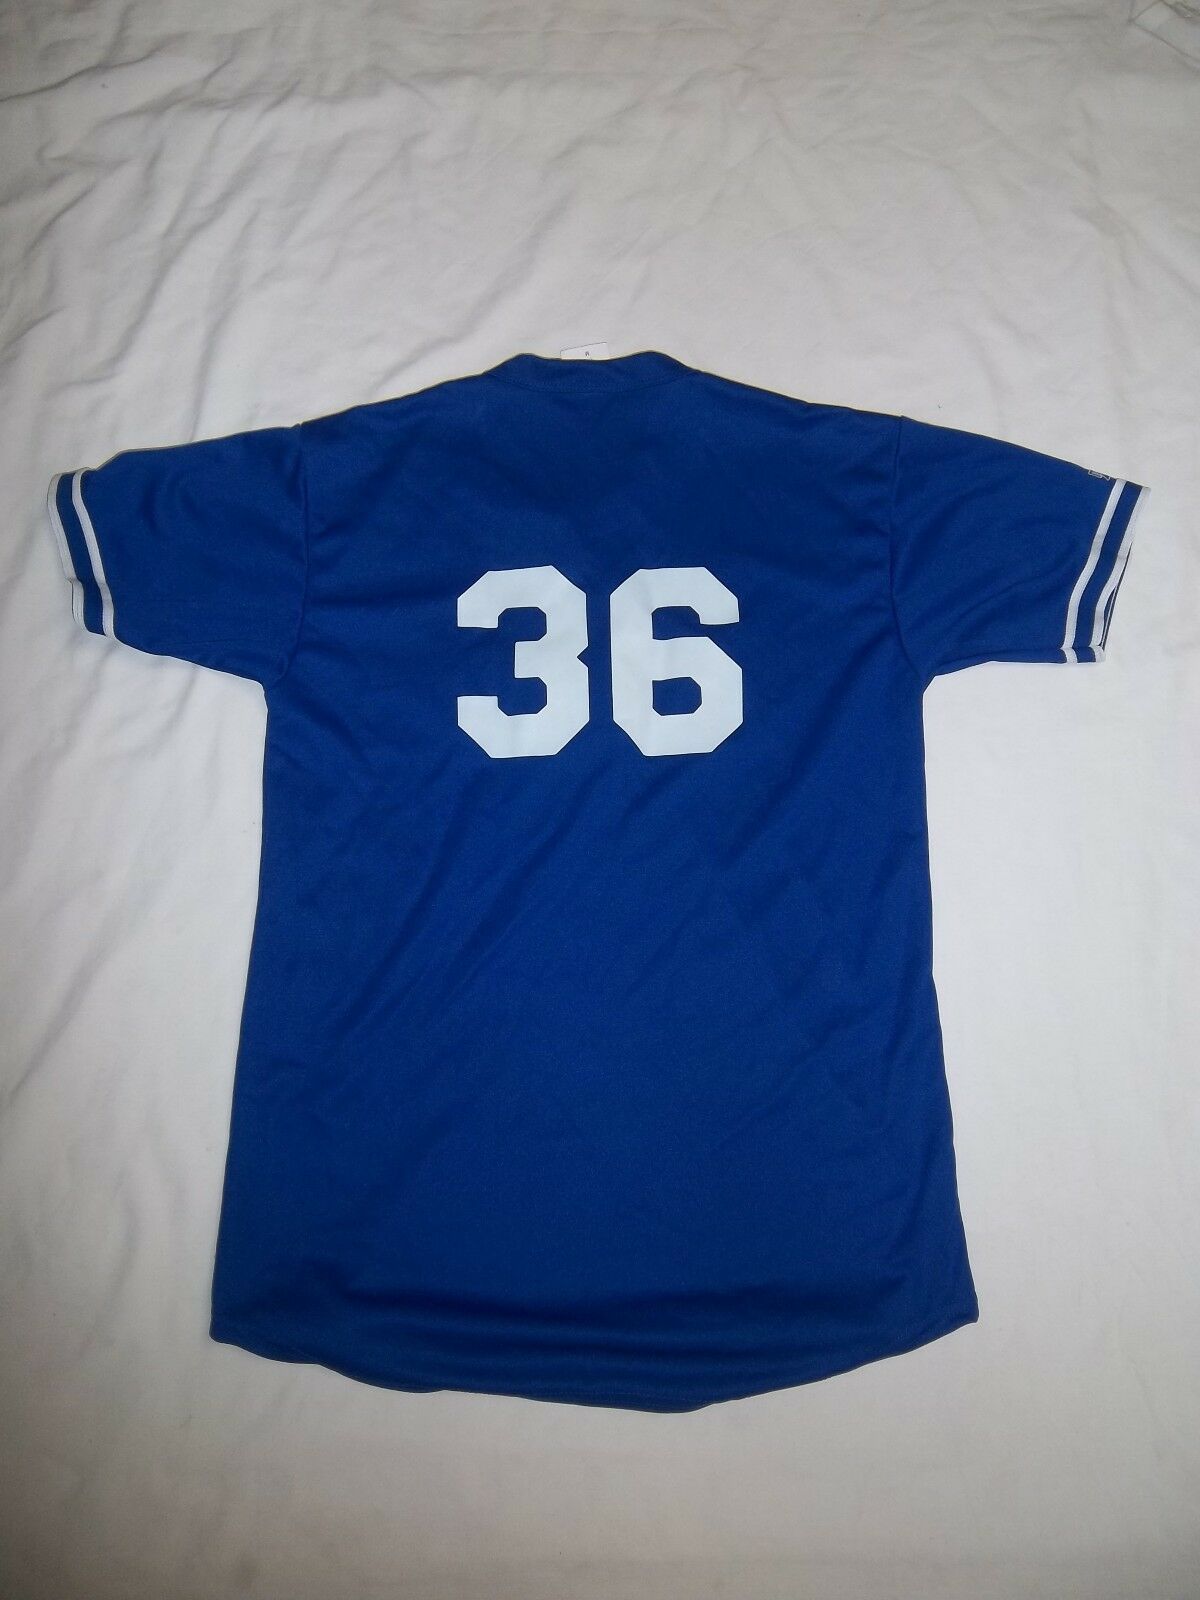 Los Angeles Dodgers Mens Jersey Majestic Throwback #10 Cey Replica